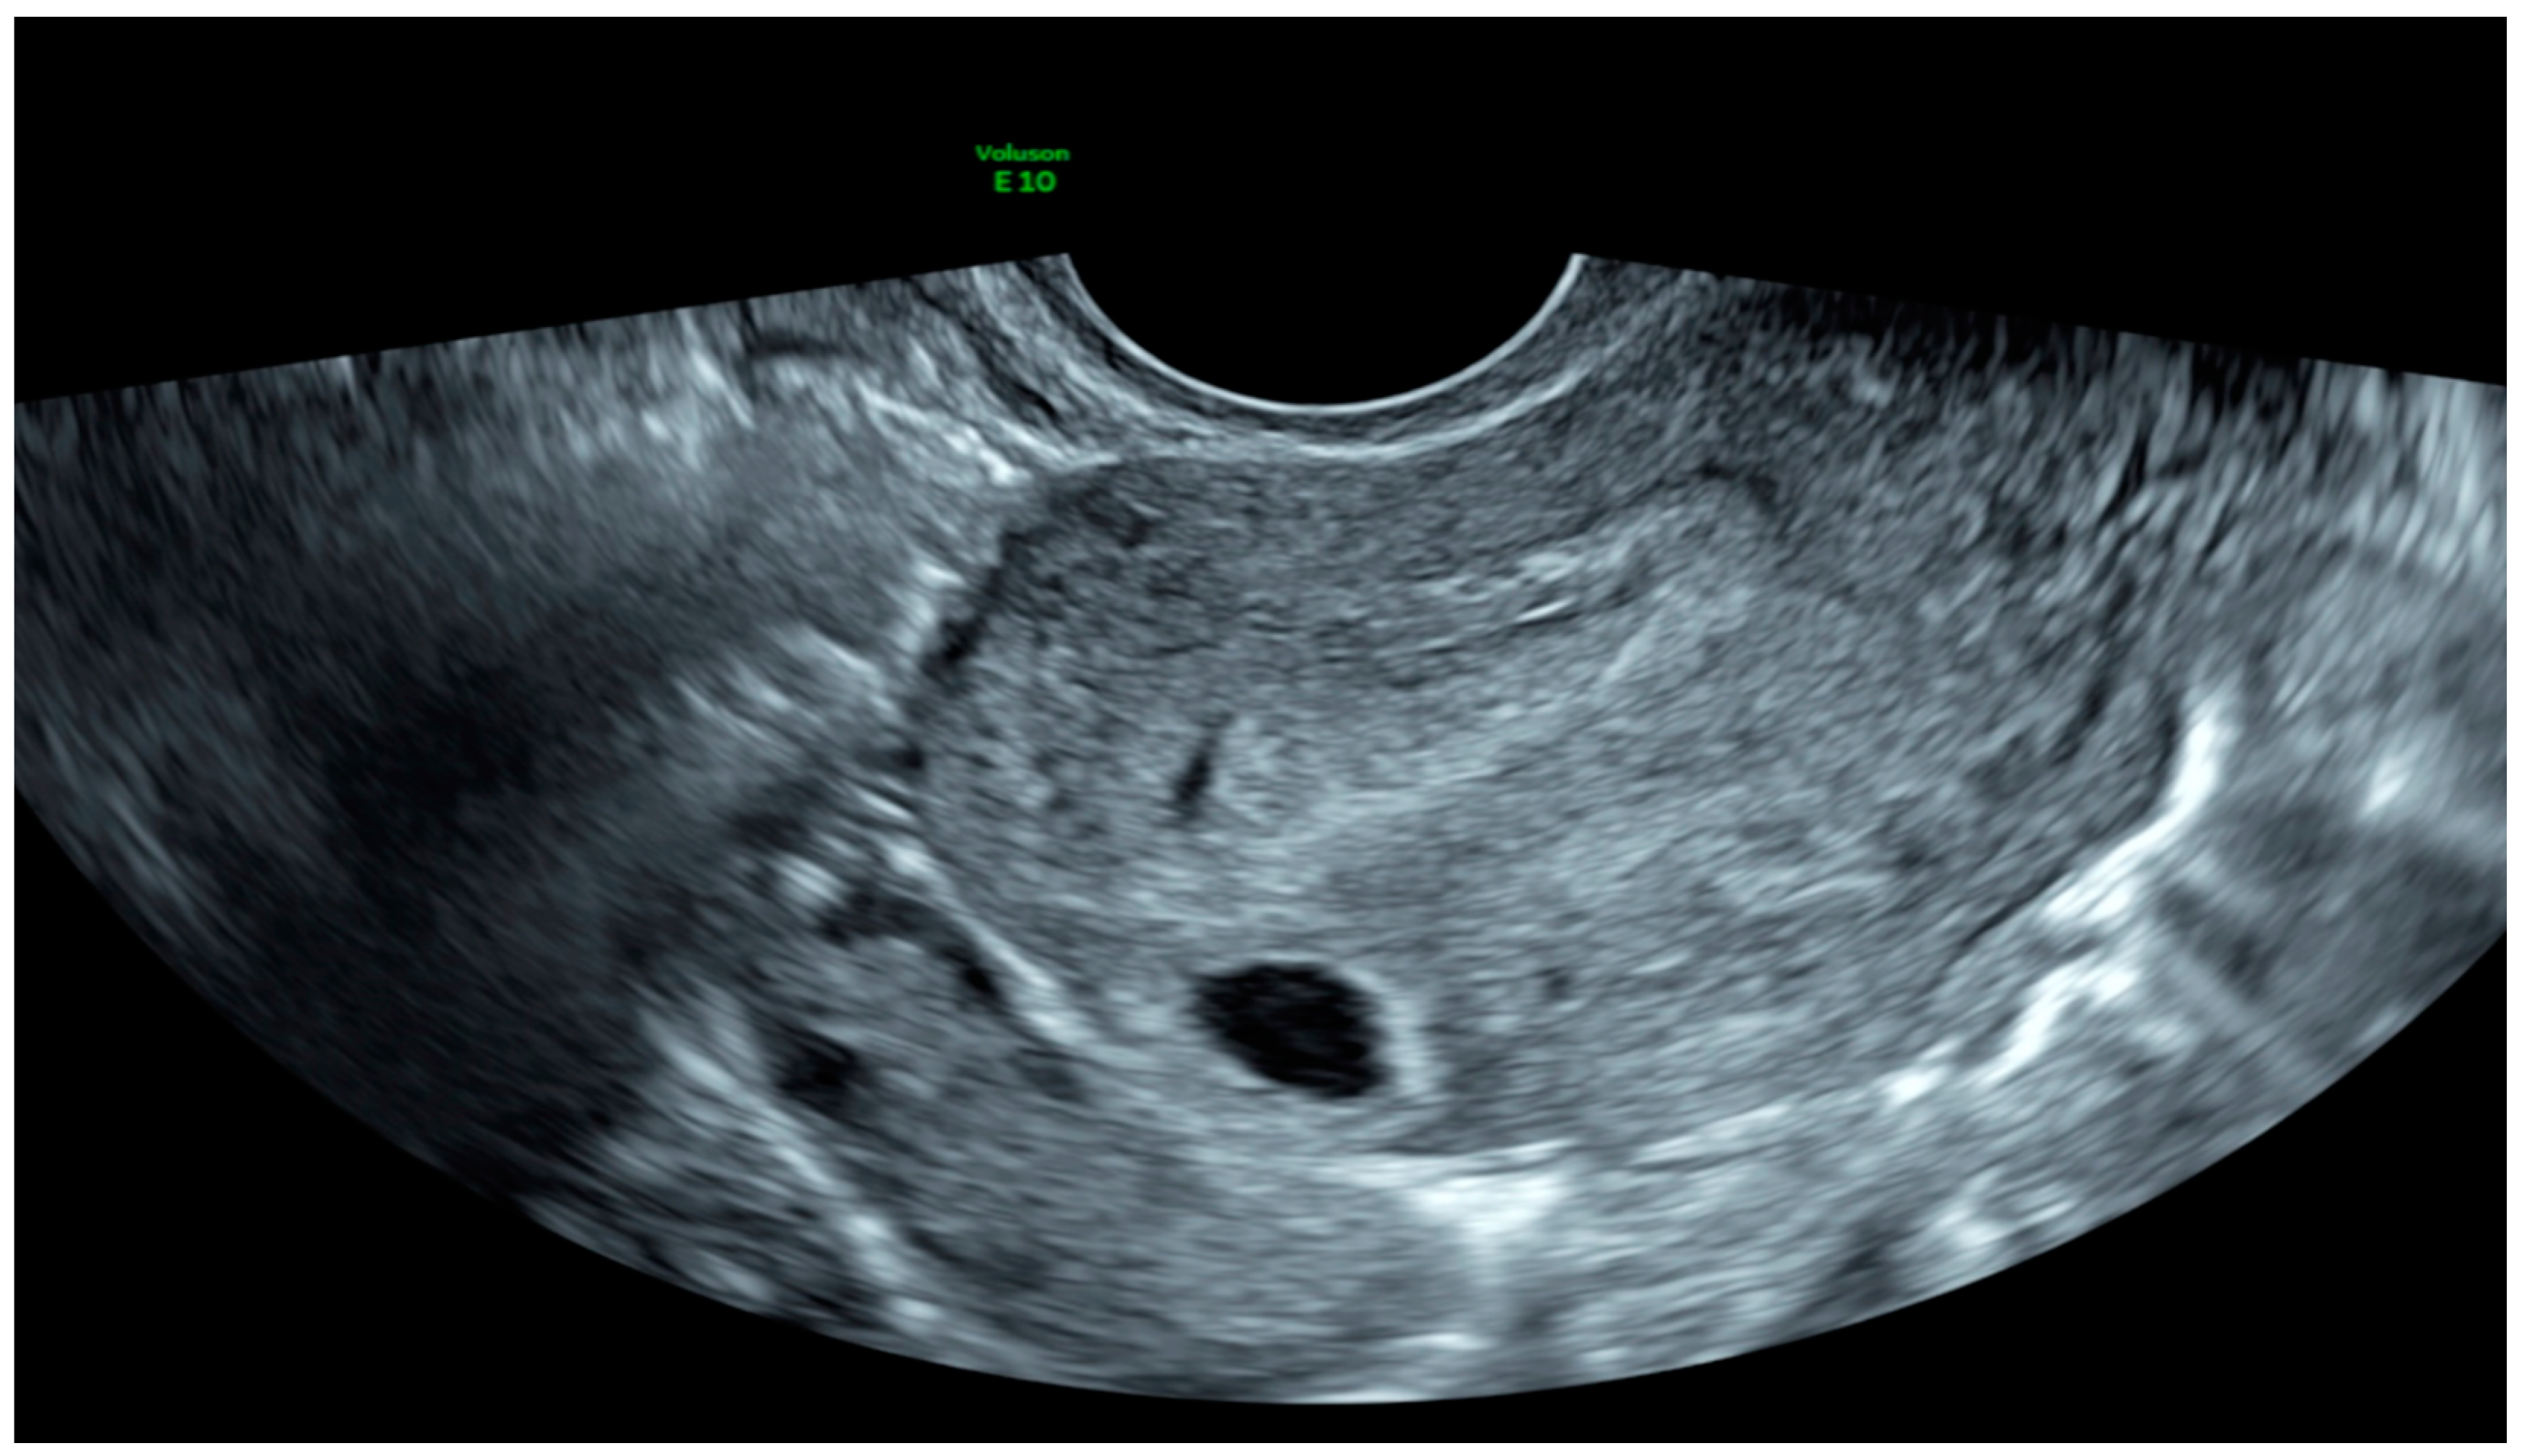 Cureus | Transvaginal Ultrasound Diagnosis of Ovarian Ectopic Pregnancy |  Article